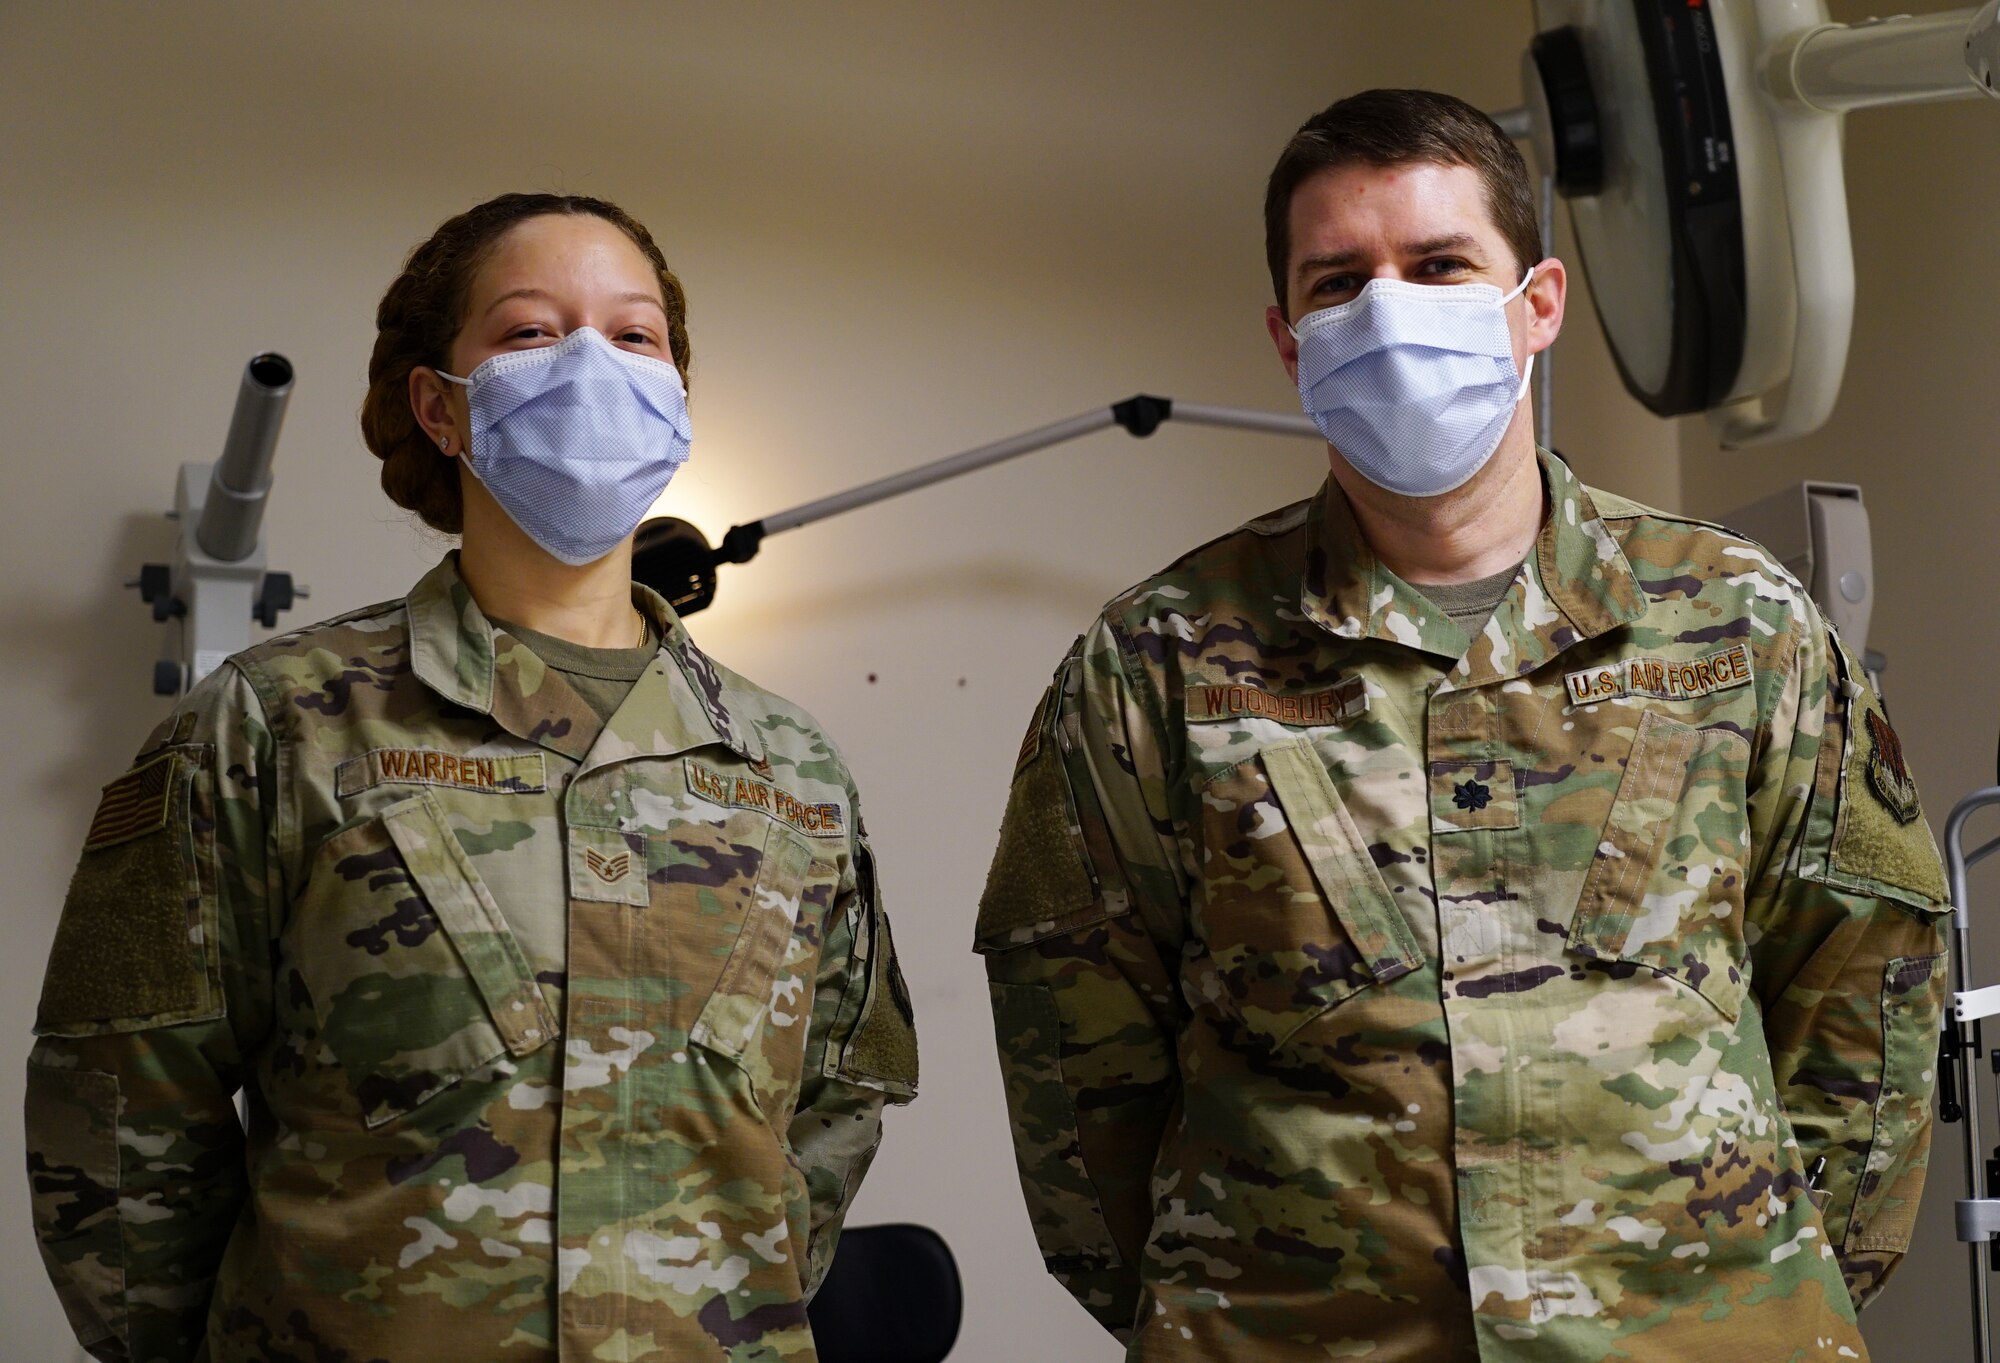 Staff Sgt. Kiara Warren, 319th Medical Operations Squadron optometry noncommissioned officer in charge, left, and Lt. Colonel Ethan Woodbury, 319 MDOS specialty care flight commander, stand for a photo in an examination room at Grand Forks Air Force Base, N.D., Jan. 21, 2021. The optometry office helps Airmen and their families receive eye care and maintain force readiness. (U.S. Air Force photo by Airman 1st Class Jack LeGrand)